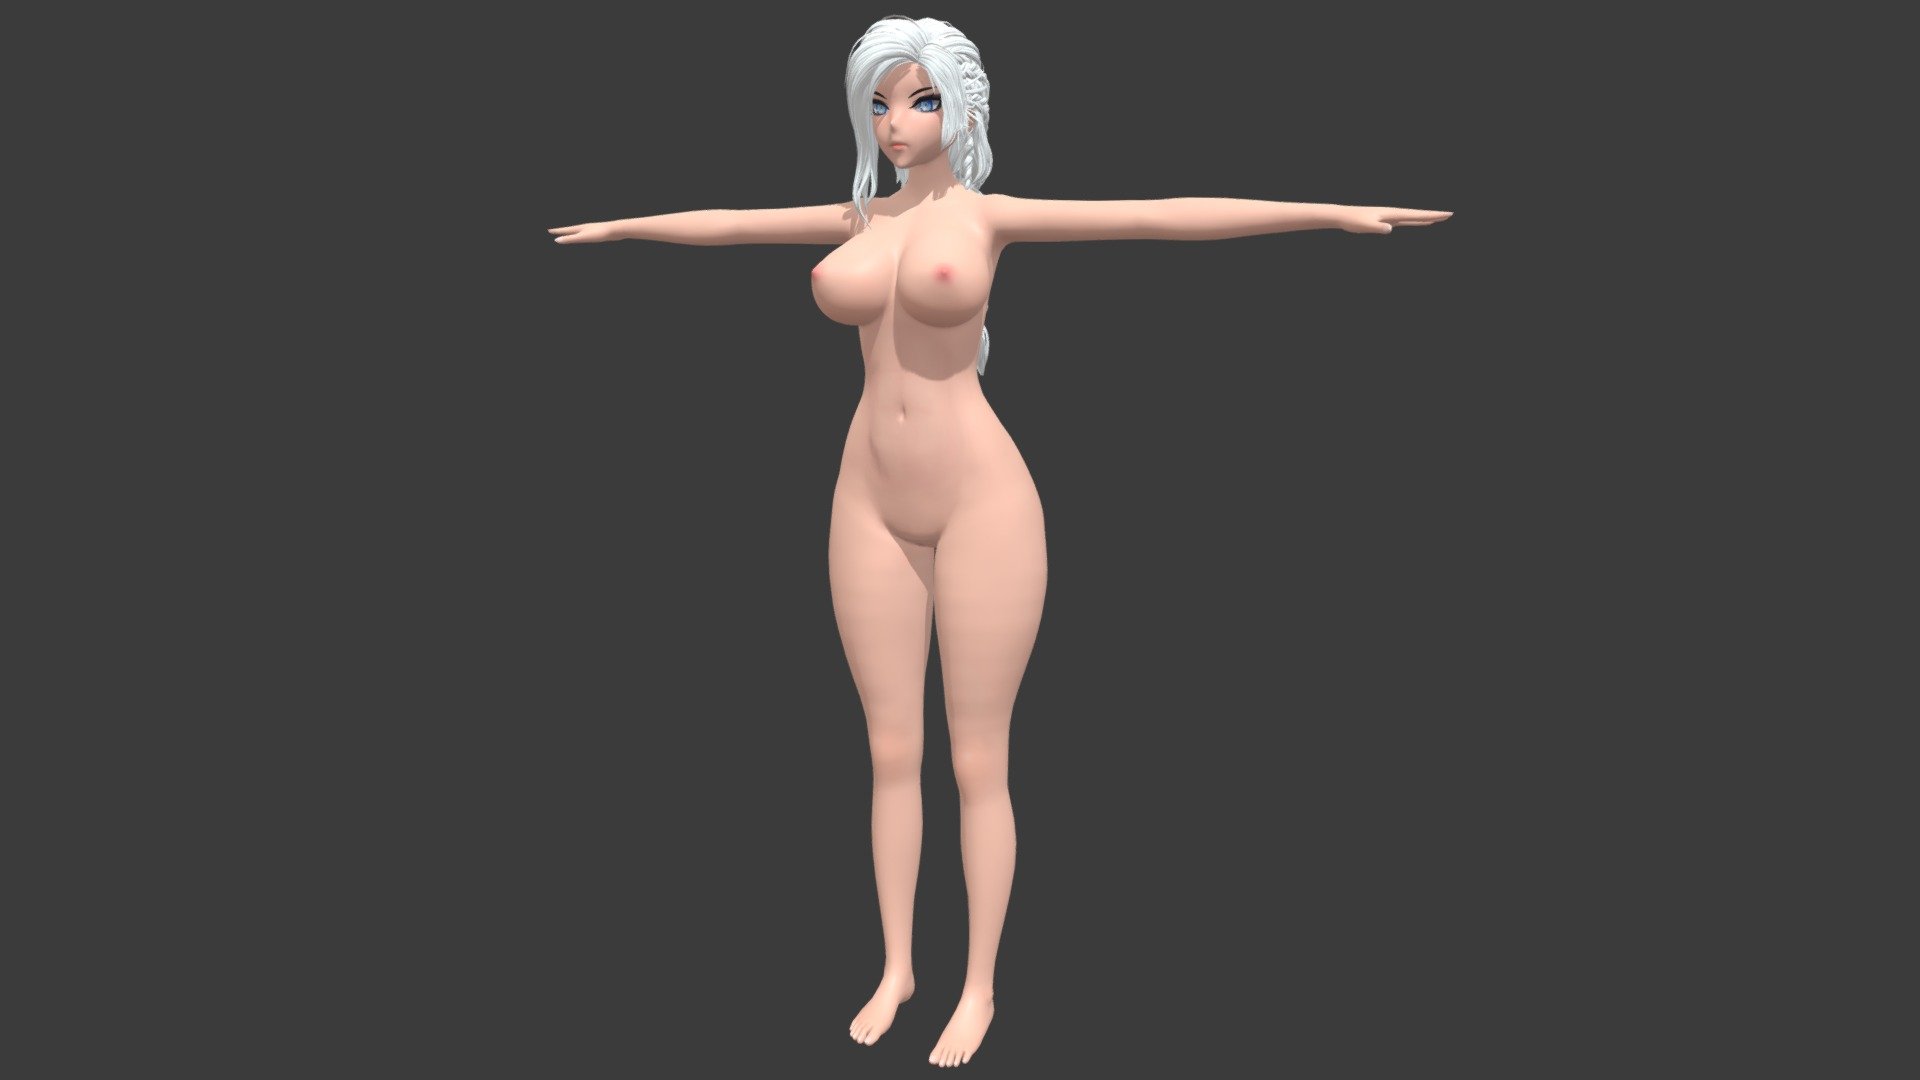 This is my model i use for presenting new outfits i make. The body base without head and hair is available for purchase in my shops.
Link to my Gumroad / Booth and all other socials are on my profile.

Made in Blender 2.83 LTS

Base Body Mesh Summary:




Fully rigged

Twist Bones (Elbow, Wirst, Knee, Ankle)

Breast,Butt and Thigh Physics

Fullbody compatible

Shapekeys for different body types

Body Texture is 4k Resolution (1 Texture + normal map) 

NSFW: This avatar has genitals with shapekeys.

23 NSFW Shapekeys:




4 Belly shapes (defined, defined 2, midriff and abs)

2 Butt shapes (bigger and bigger2)

4 Leg shapes (bigger, bigger2 and inner thighs,calves bigger)

1 Crotch defined

5 Breast shapes (smaller/smaller2/bigger/closer together/lower)

4 Nipple shapes (nipples out/defined/pointy/flatter)

1 Anus shape (open)

1 Vagina shape (open)

1 Heeled Feet
 - Female Anime Base Body - 3D model by SayakiArt 3d model